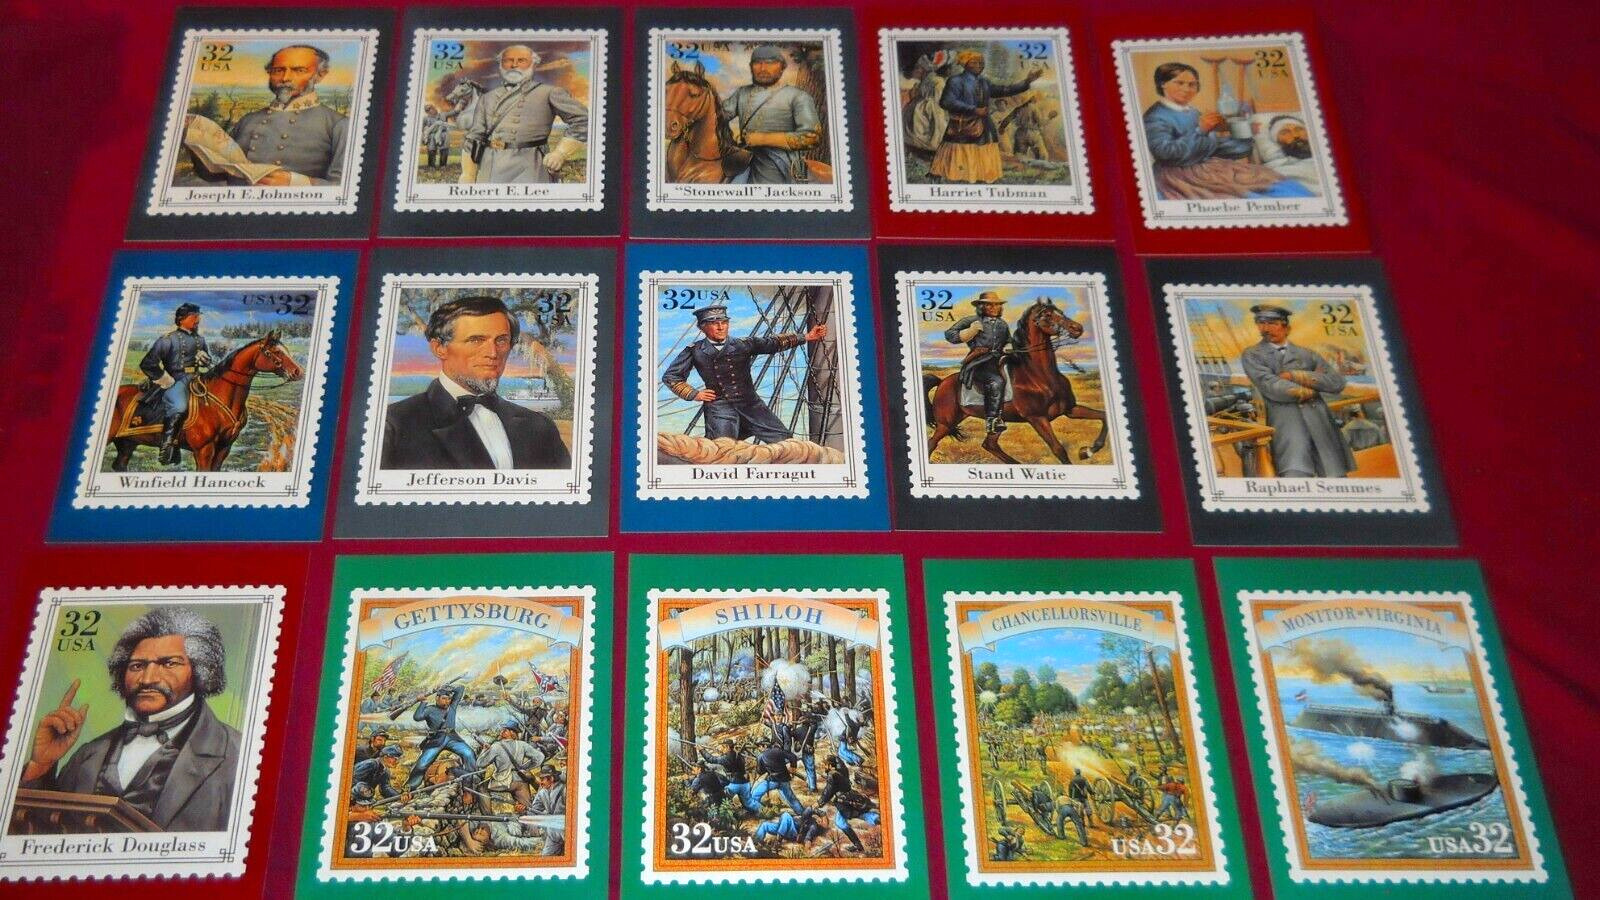 Civil War Post Card Set Of 20 USPS Classic Collection Series 1997 Generals